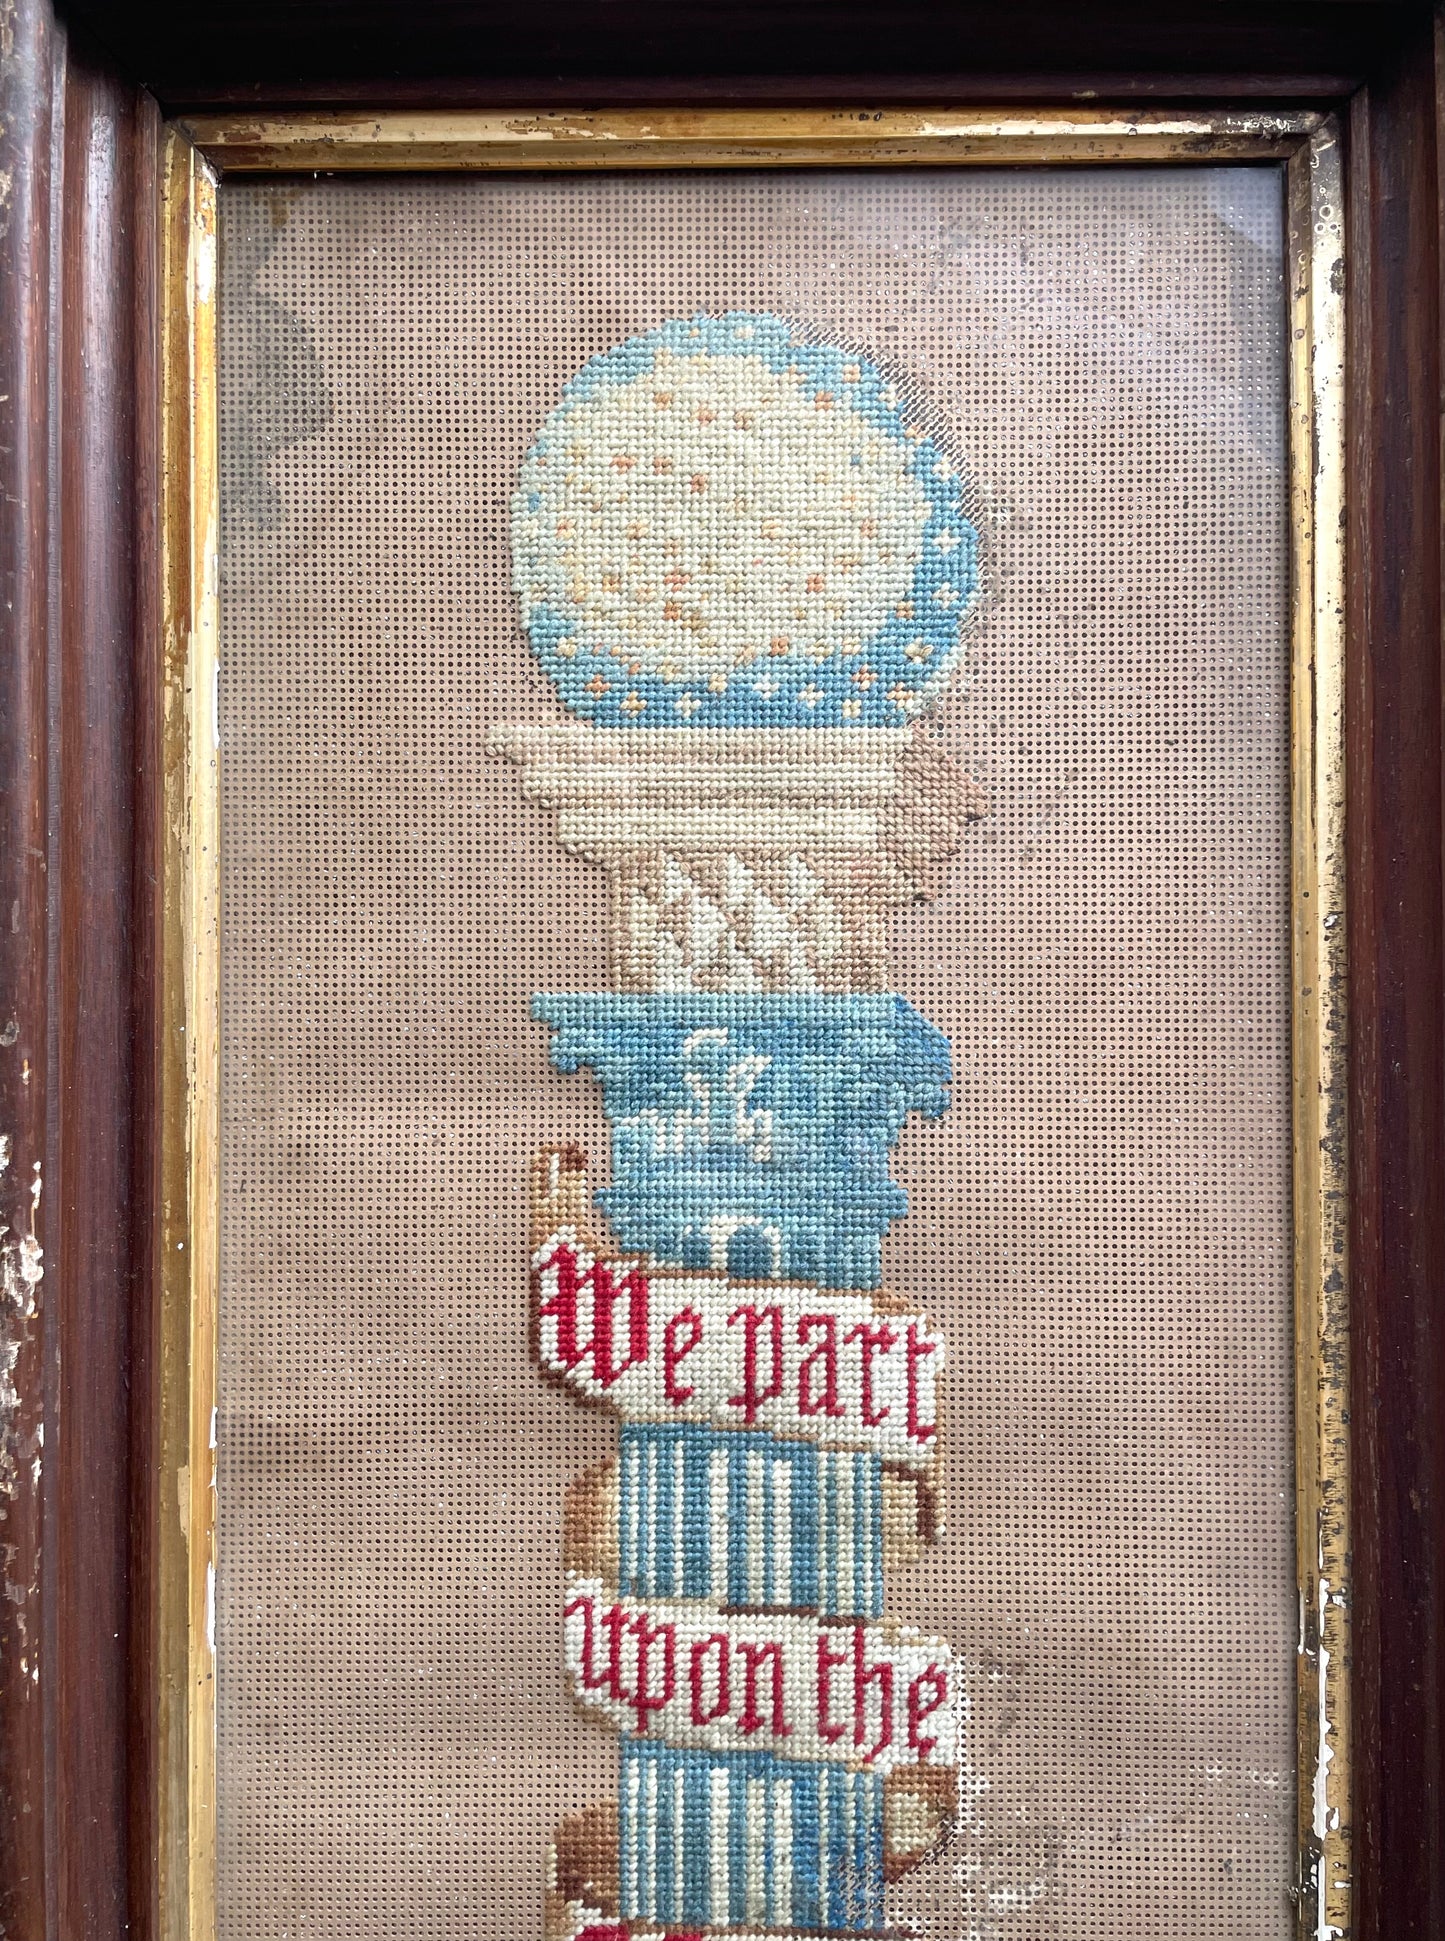 Antique Masonic Punchwork Embroideries | We Meet Upon the Level, We Part Upon the Square